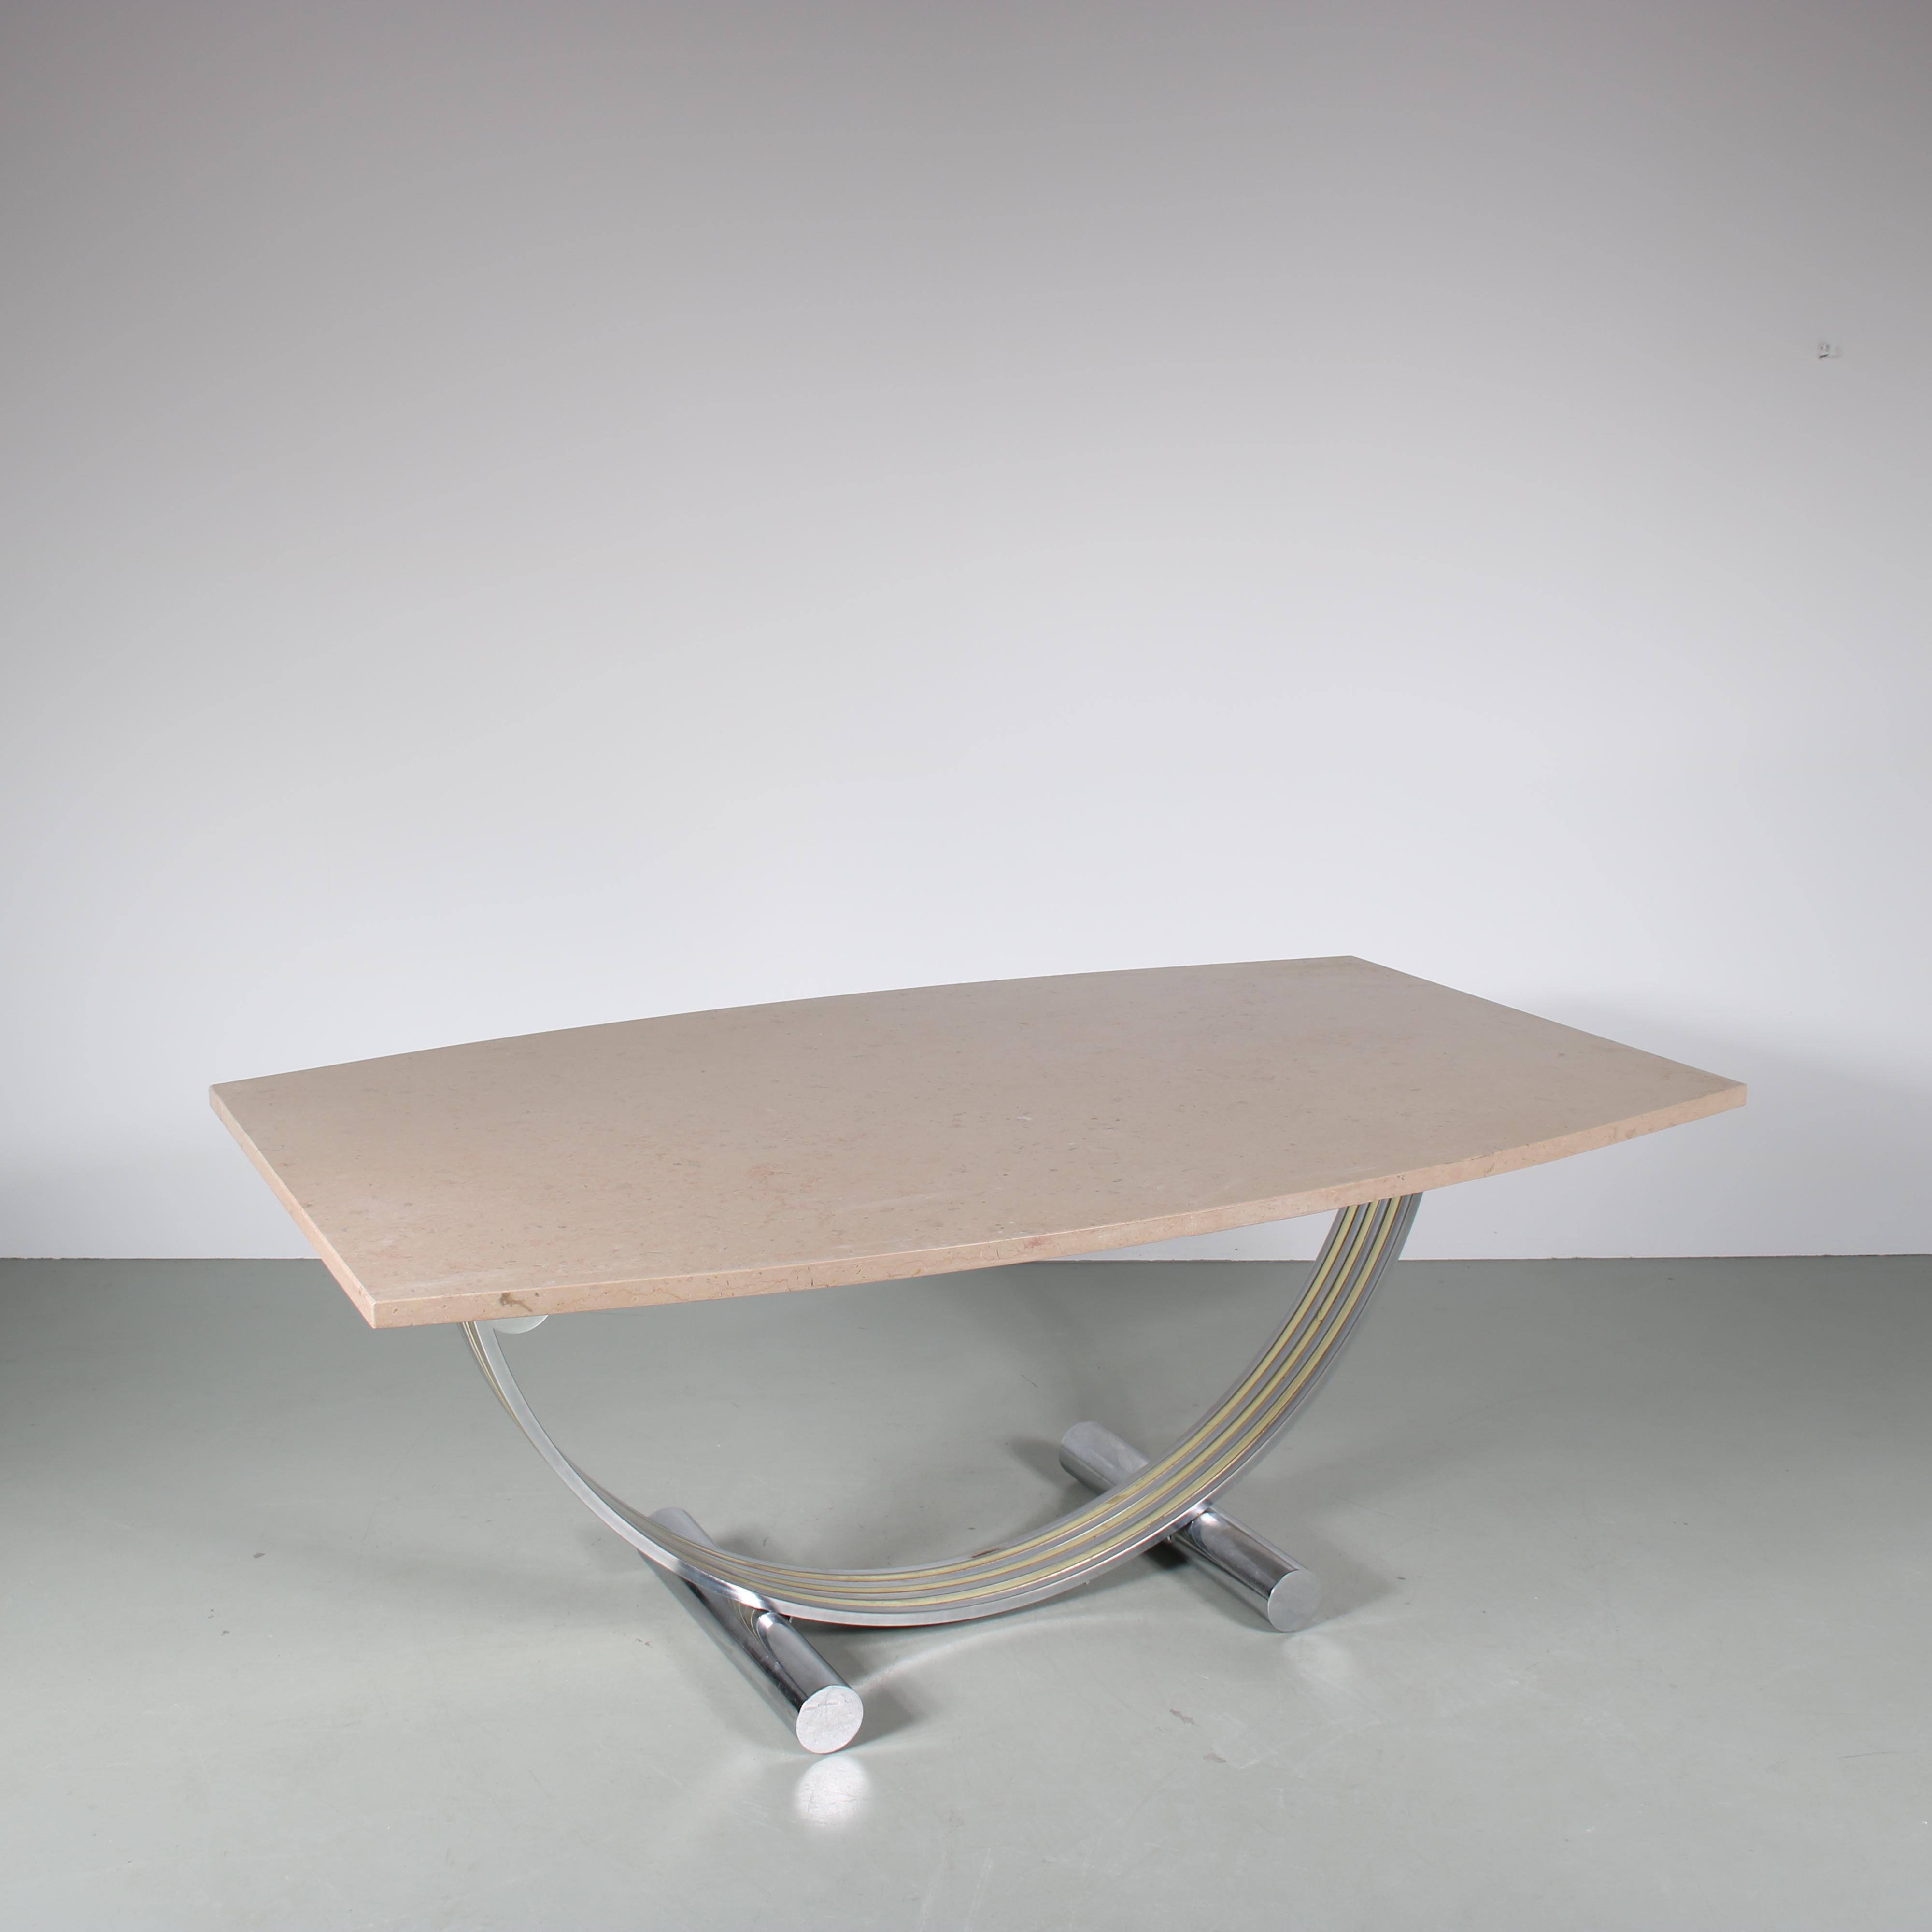 A wonderful dining table, designed by Romeo Rega and manufactured in Italy around 1970.

The unique frame of the table has chrome plated, tubular metal legs and supports connected by a large half-circle shaped frame in chrome and gold plated